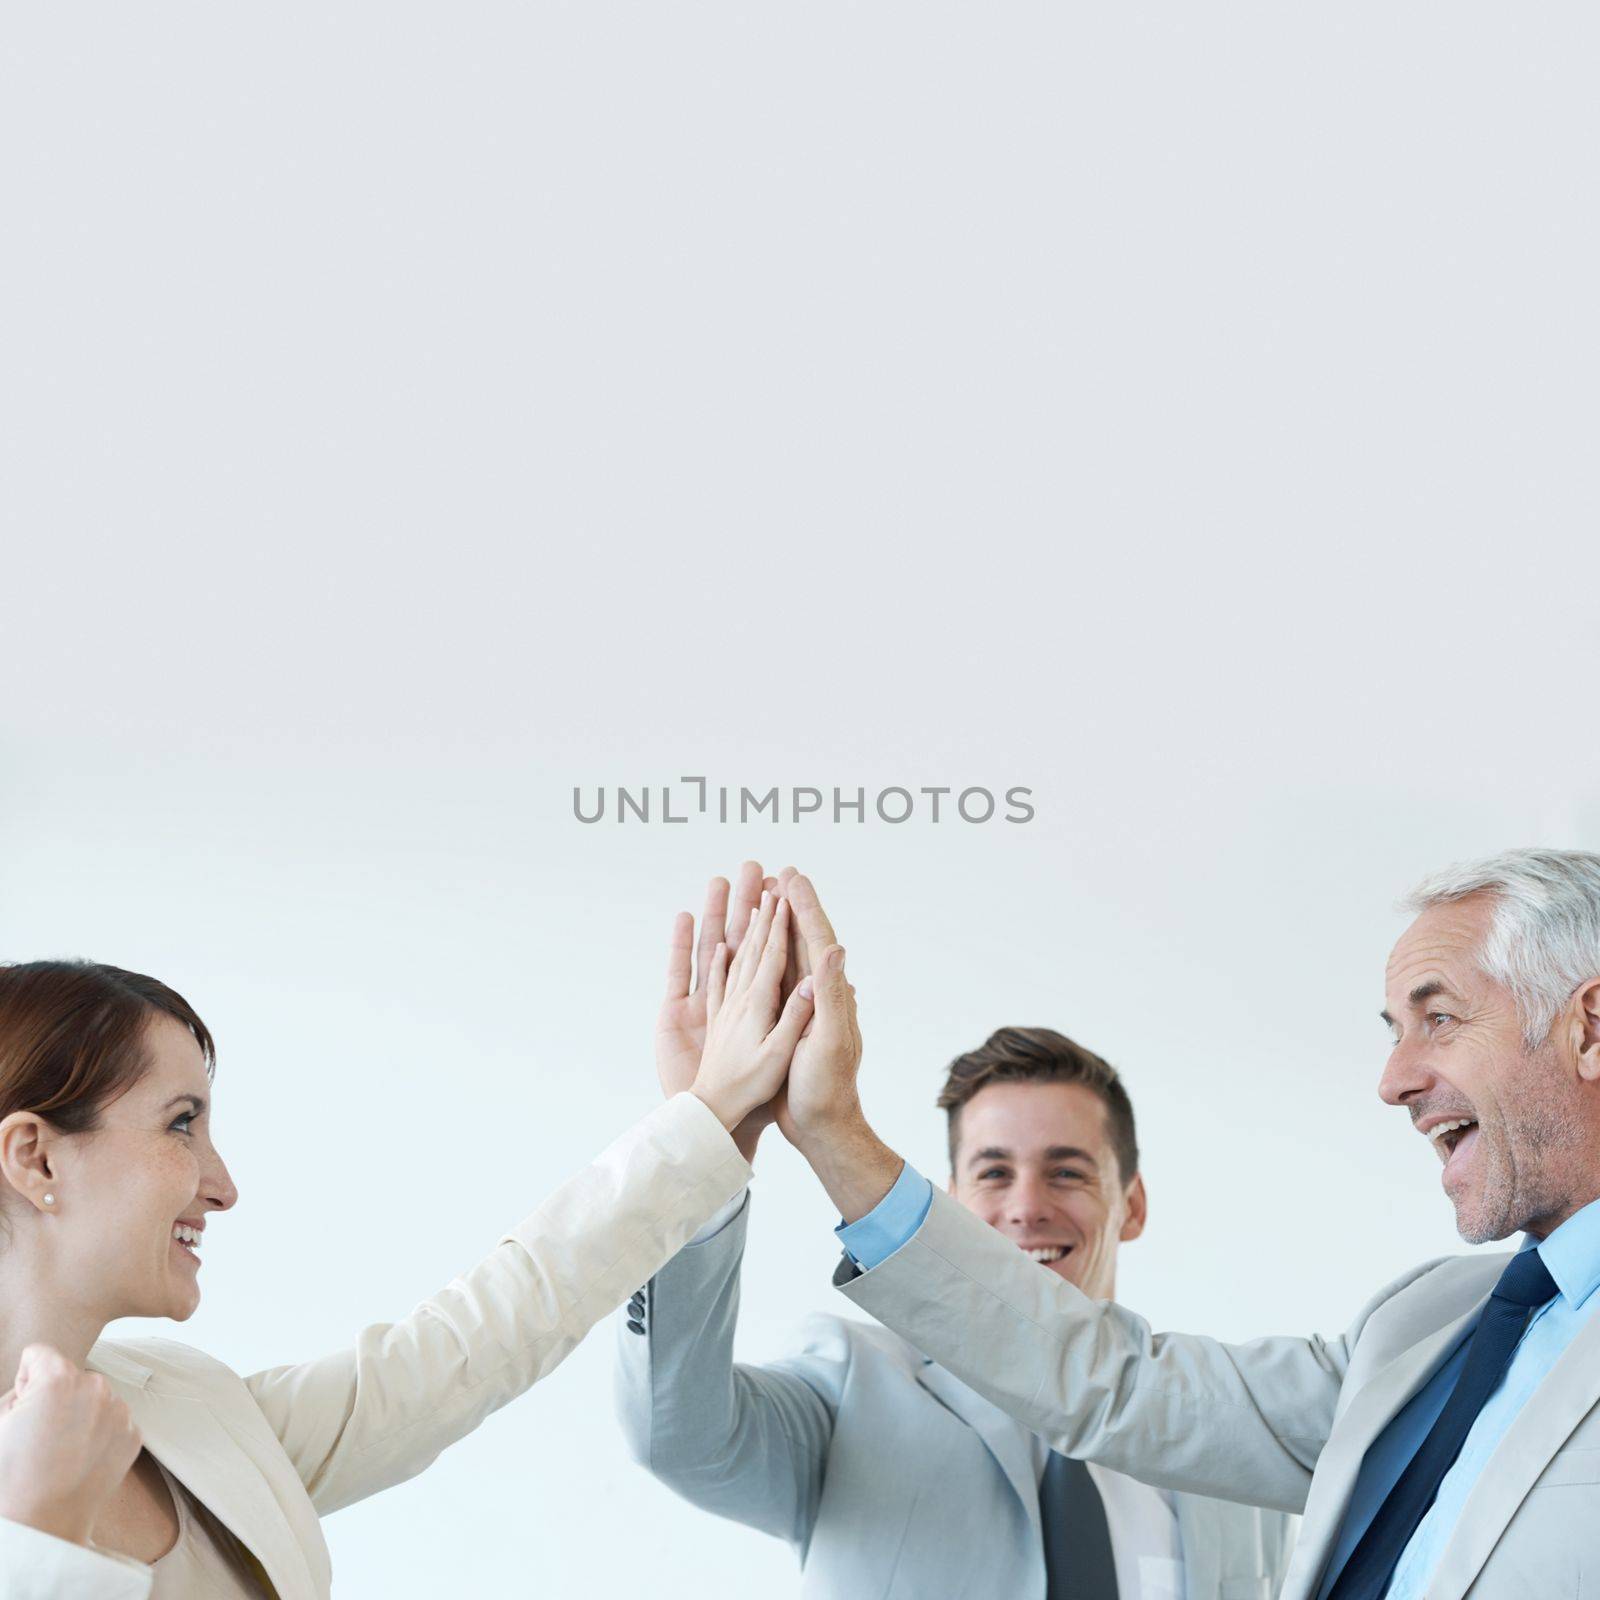 They reached their goals. Business people celebrating another successful deal with a high-five